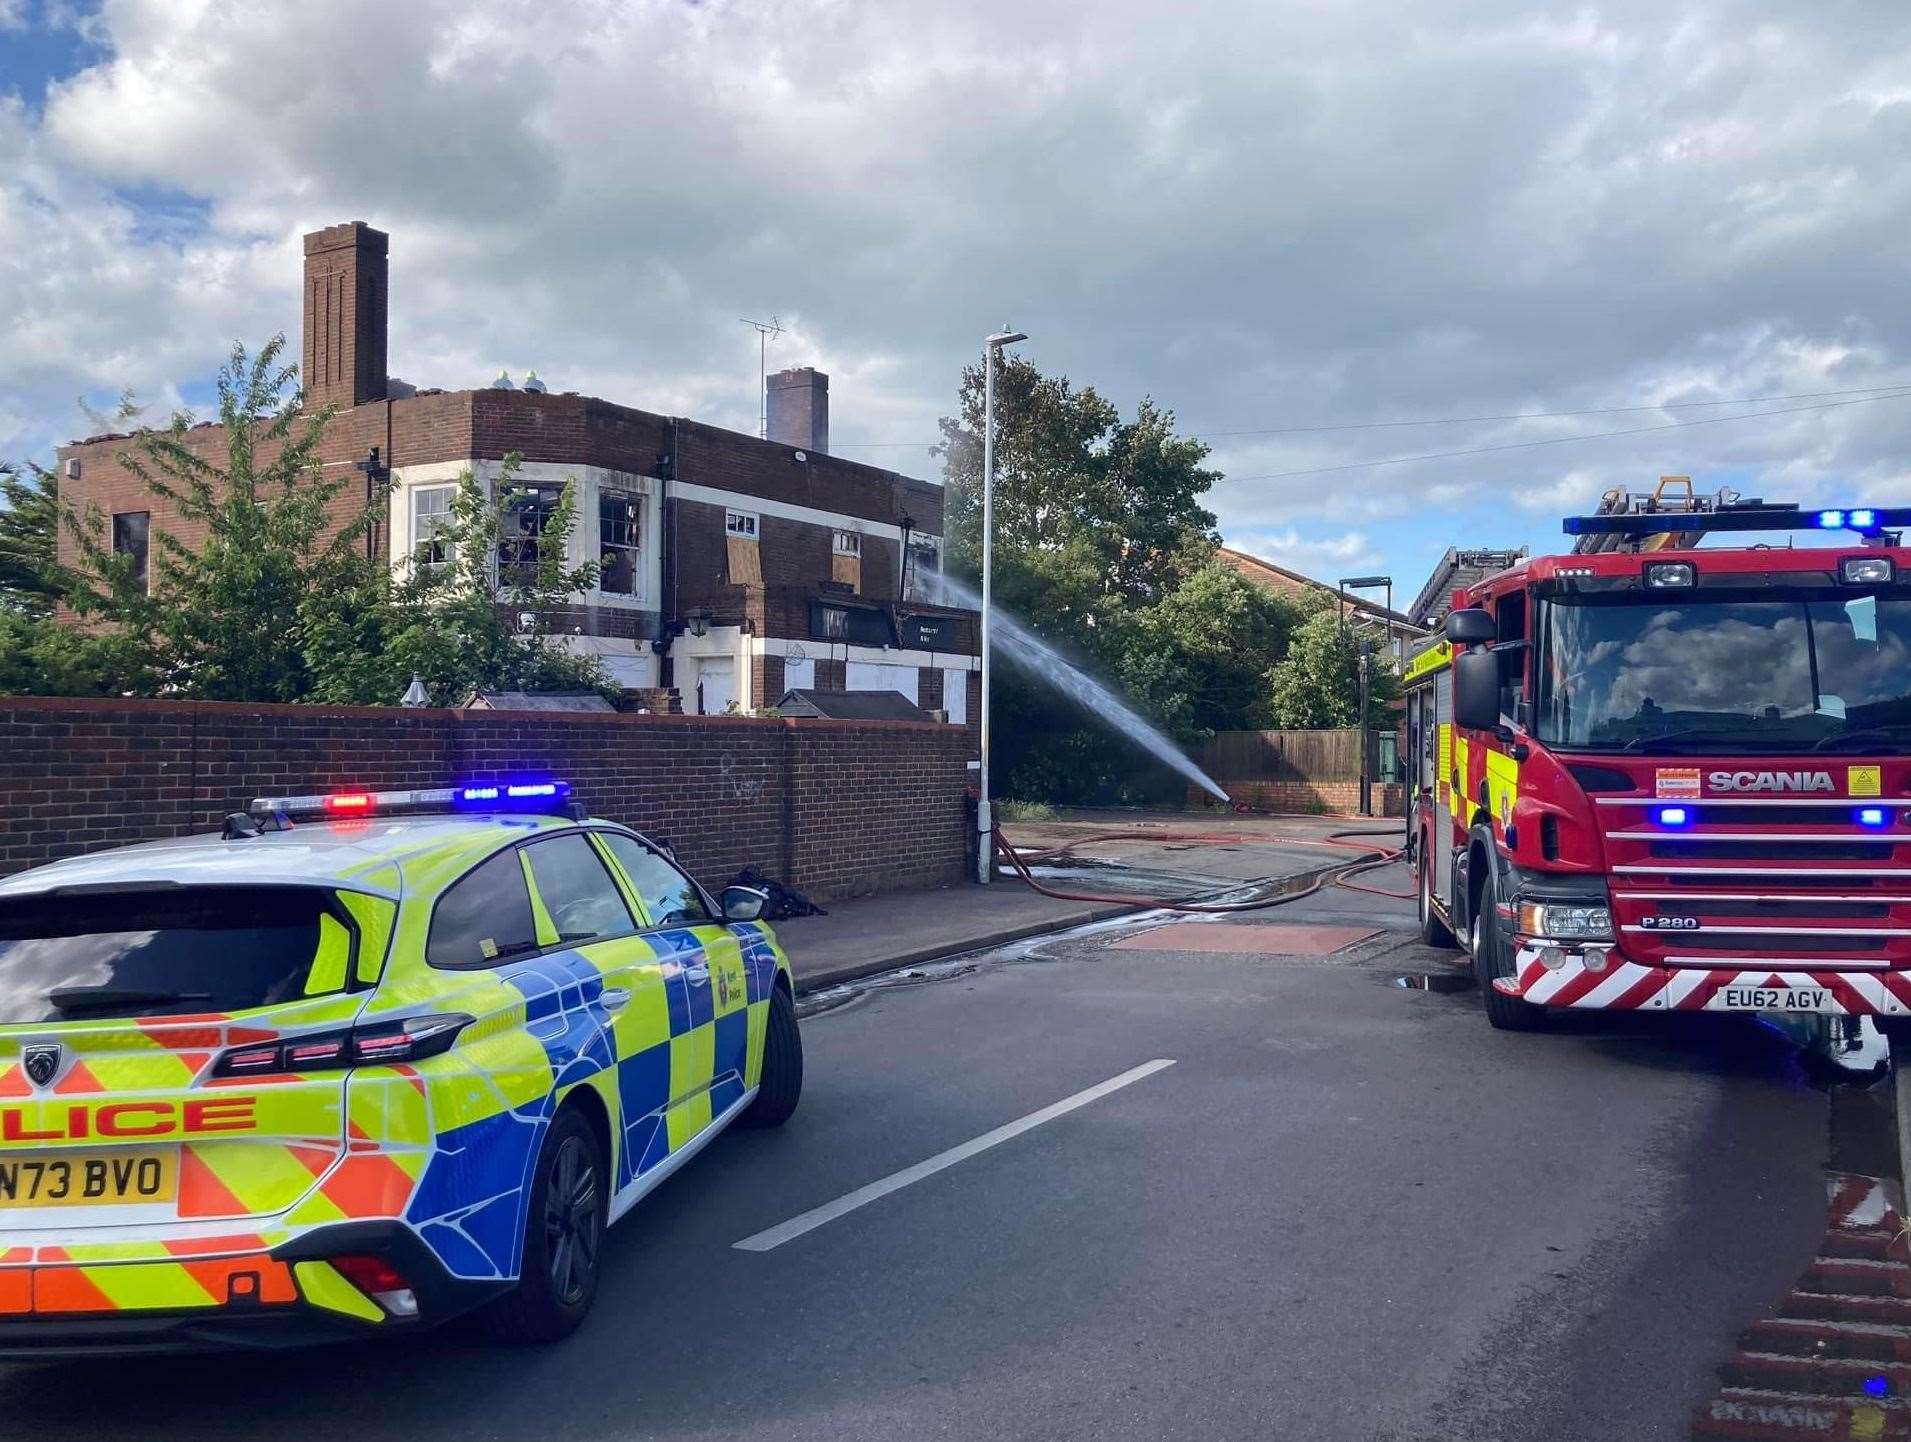 Firefighters tackling the blaze at the former Nore pub in St George's Avenue, Sheerness. Photo: John Nurden